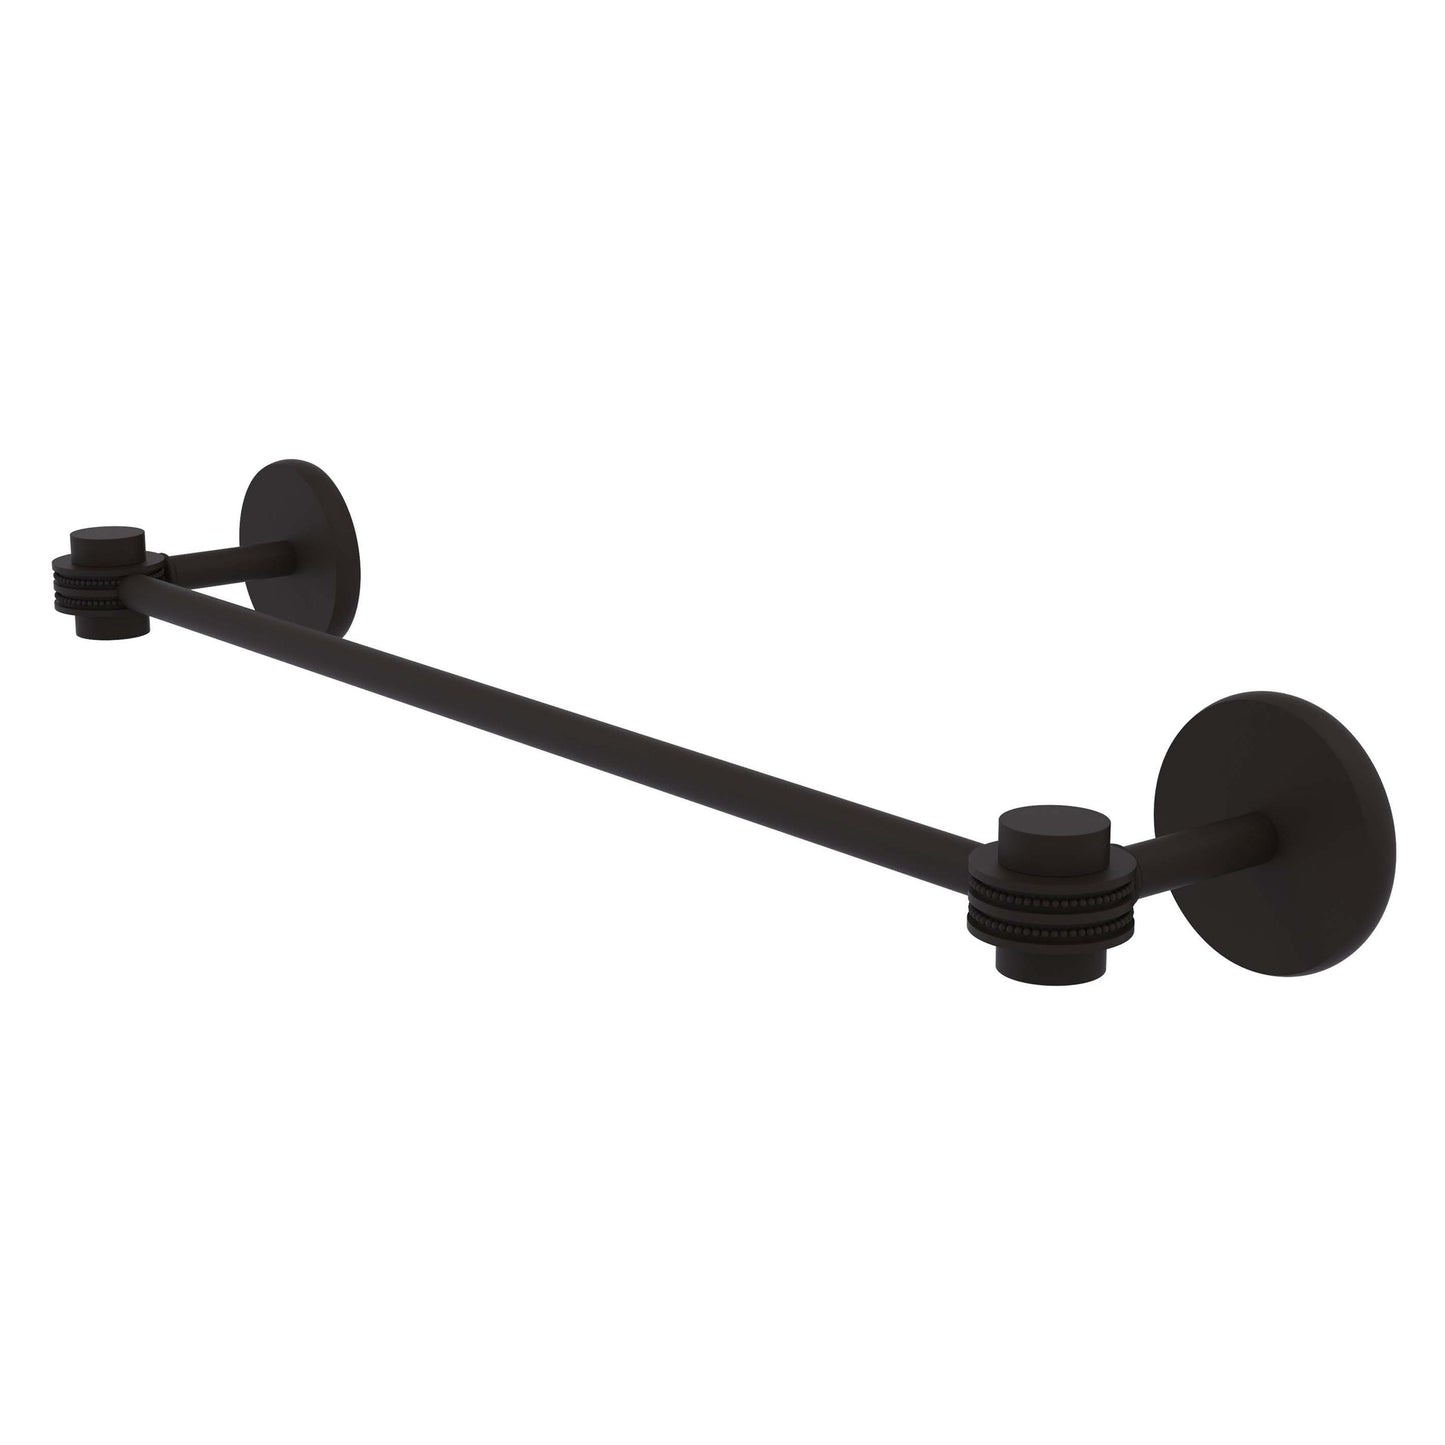 Allied Brass Satellite Orbit One 30" x 32.5" Oil Rubbed Bronze Solid Brass Towel Bar With Dotted Accents